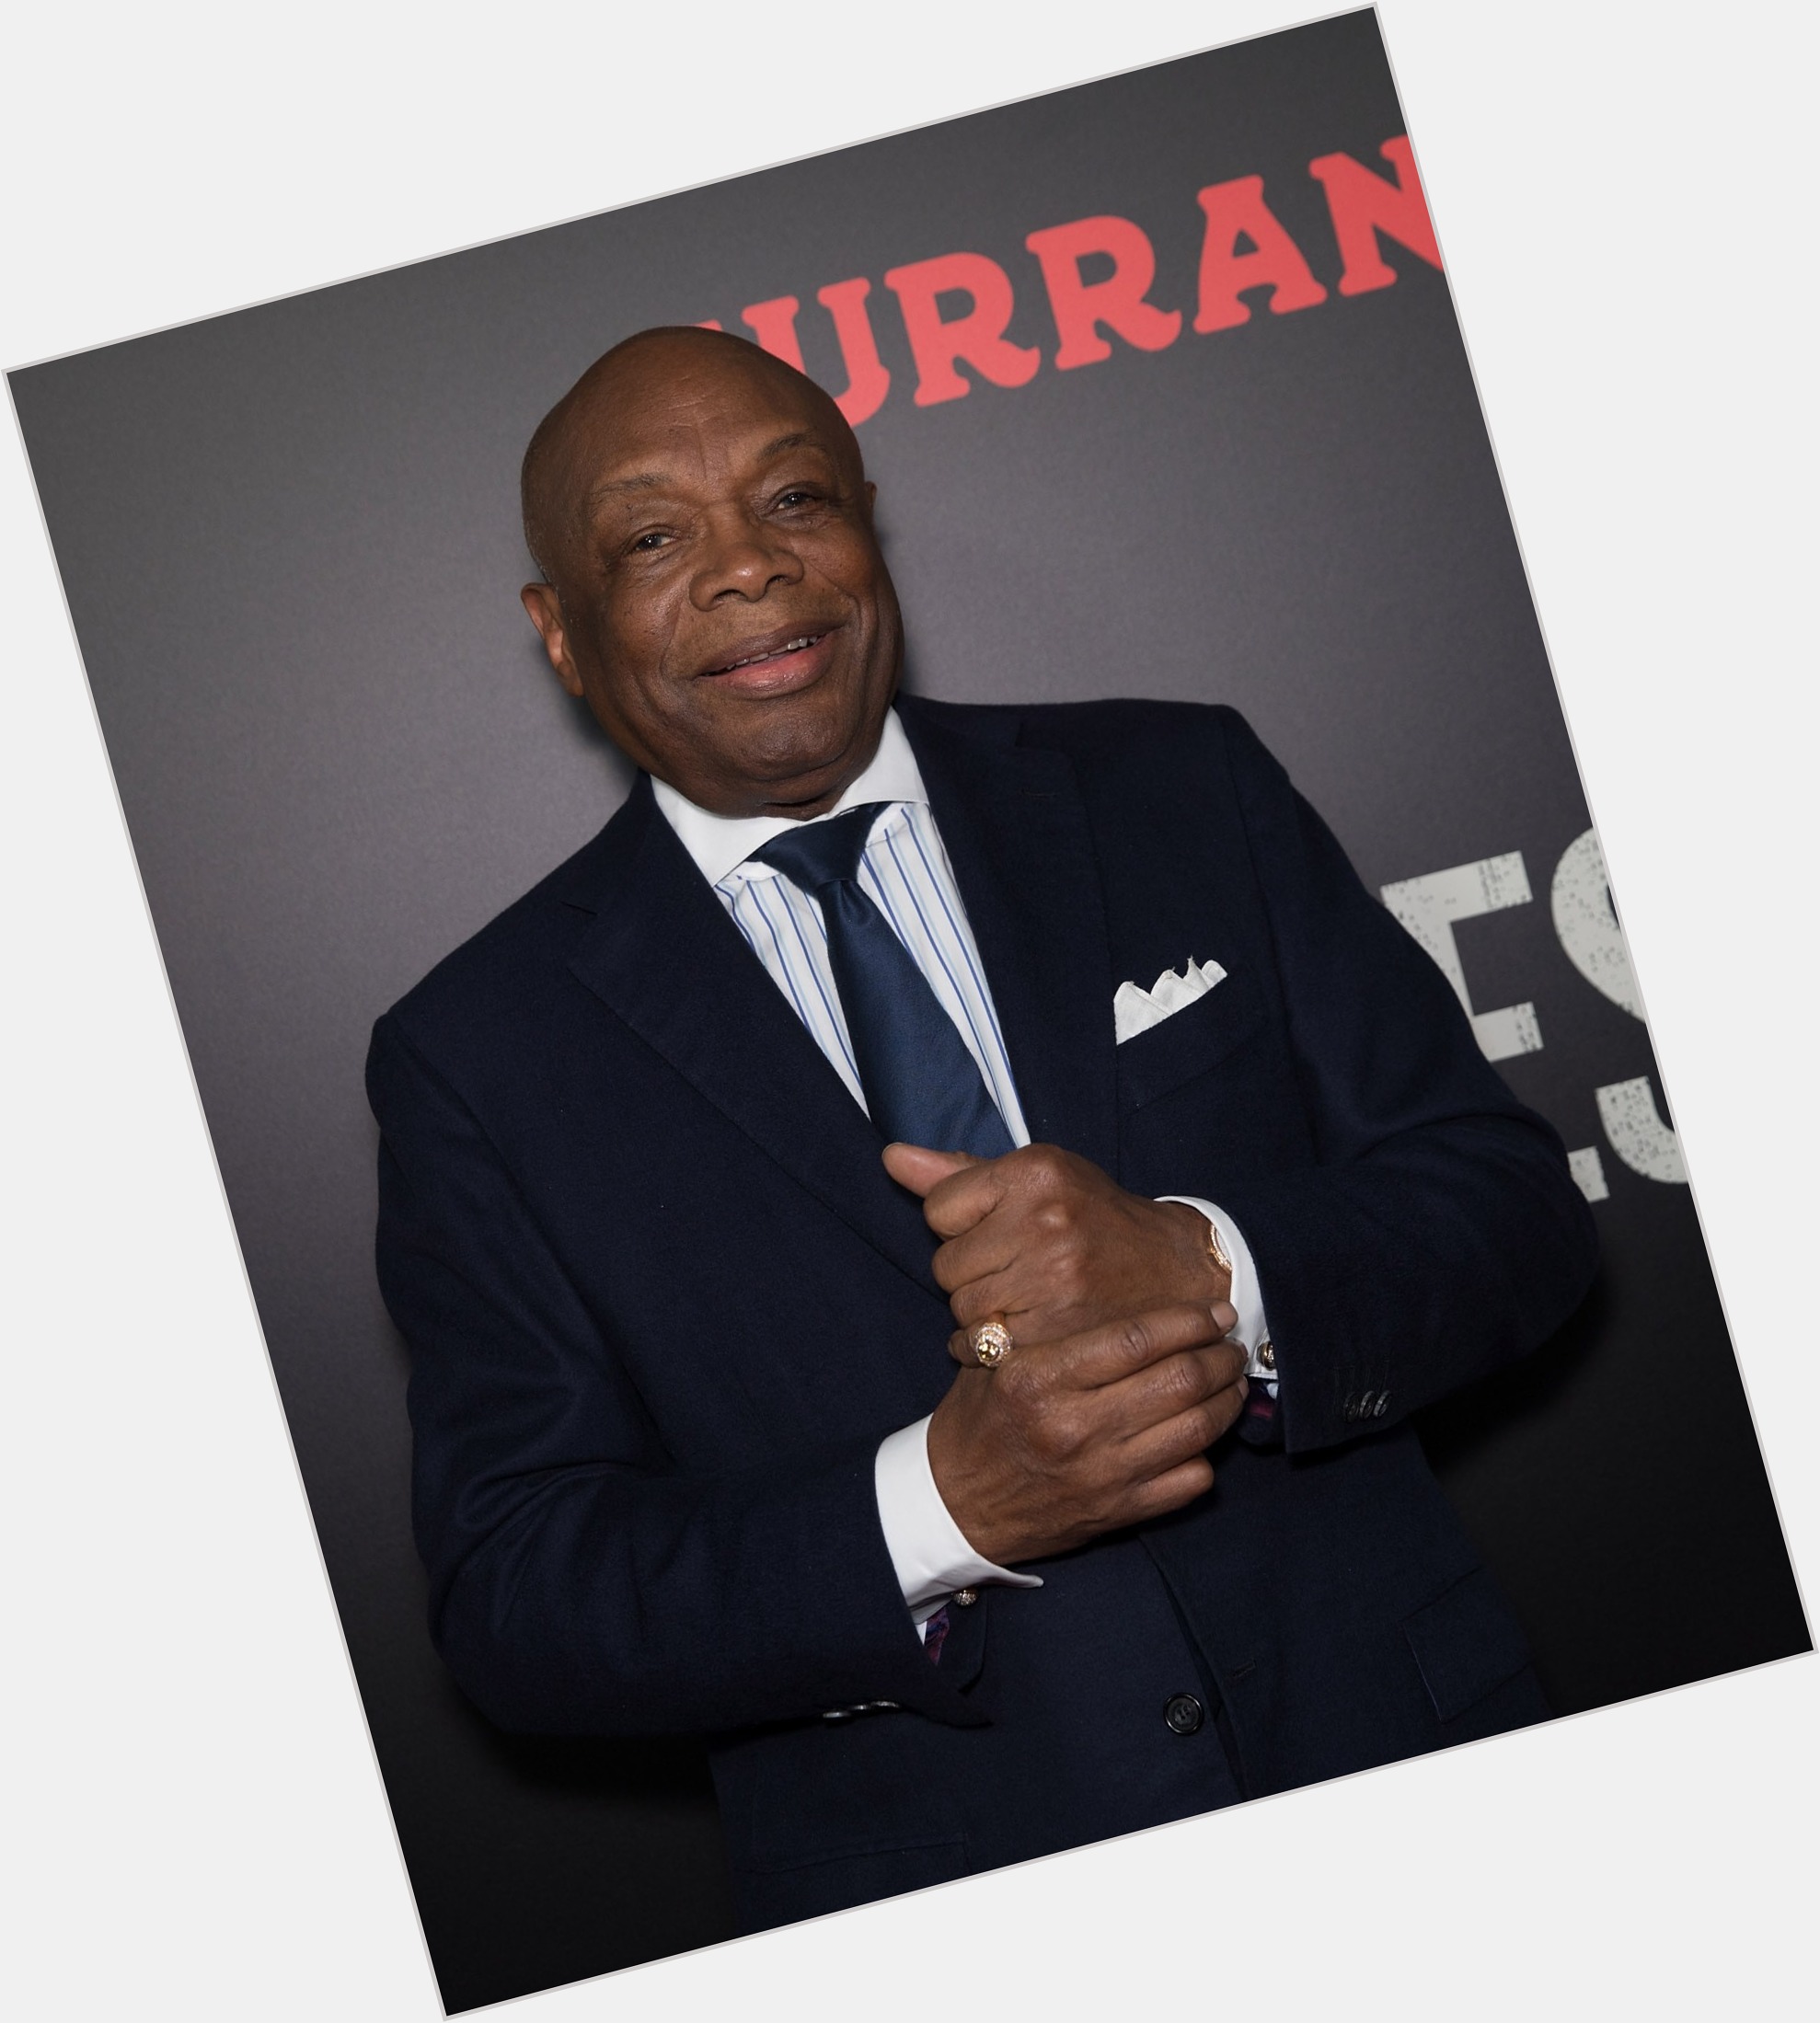 <a href="/hot-men/willie-brown/where-dating-news-photos">Willie Brown</a>  